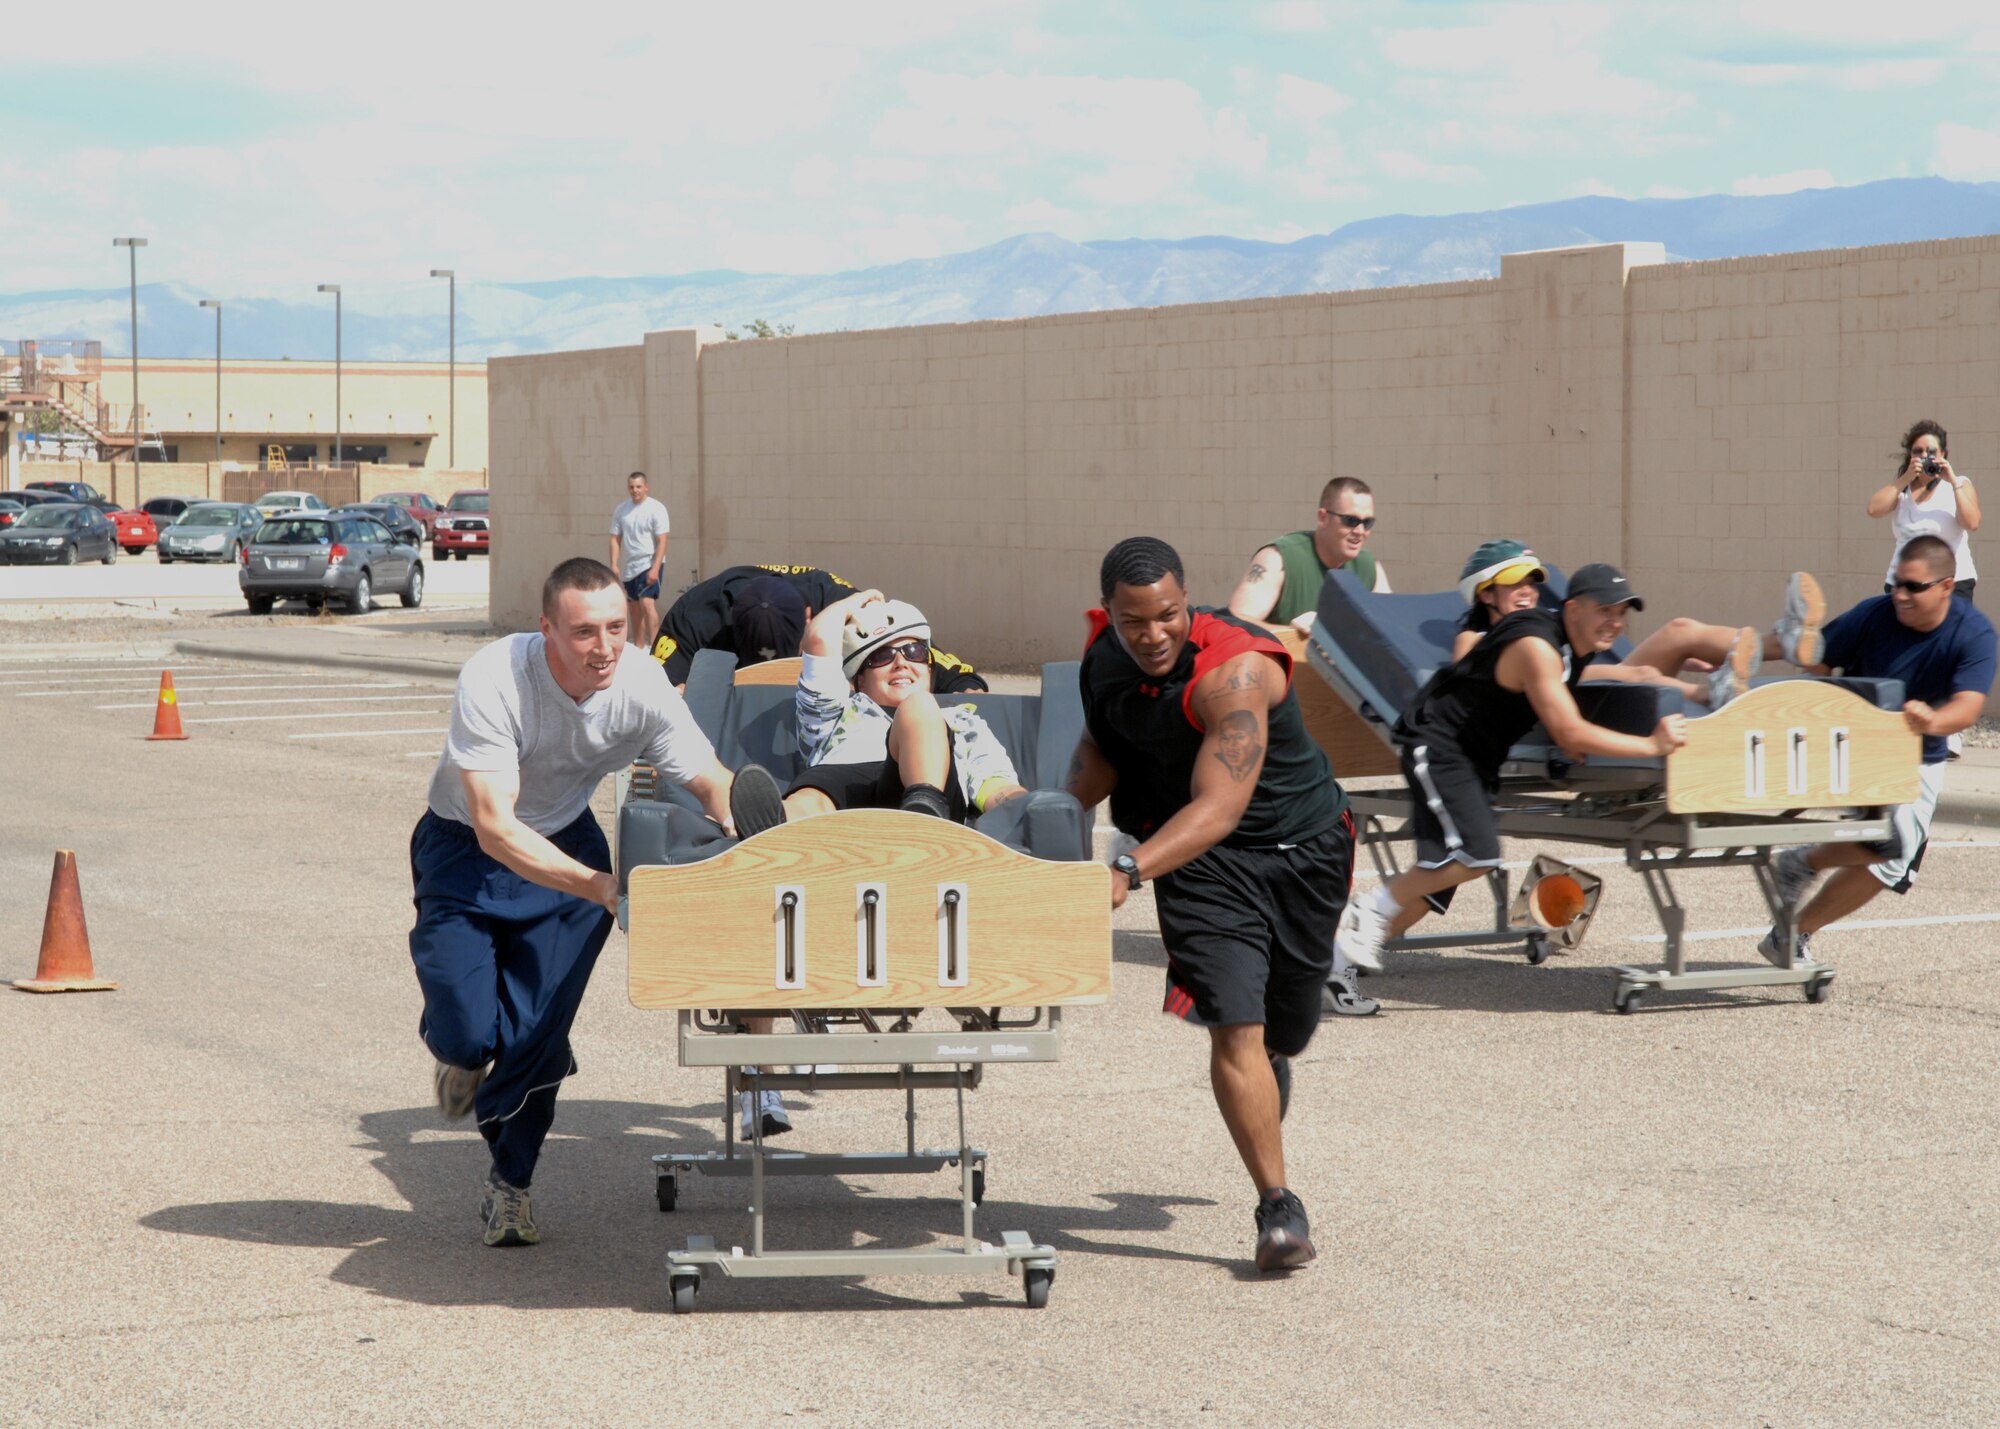 49th Security Forces Squadron team members lead the bed race against the 49th Materiel Maintenance Support Squadron team at Holloman Air Force Base, N.M., October 10. More than 2,000 Airmen from all squadrons come out to participate in Sport Day activities. (U.S. Air Force photo/Airman 1st Class Veronica Salgado) 